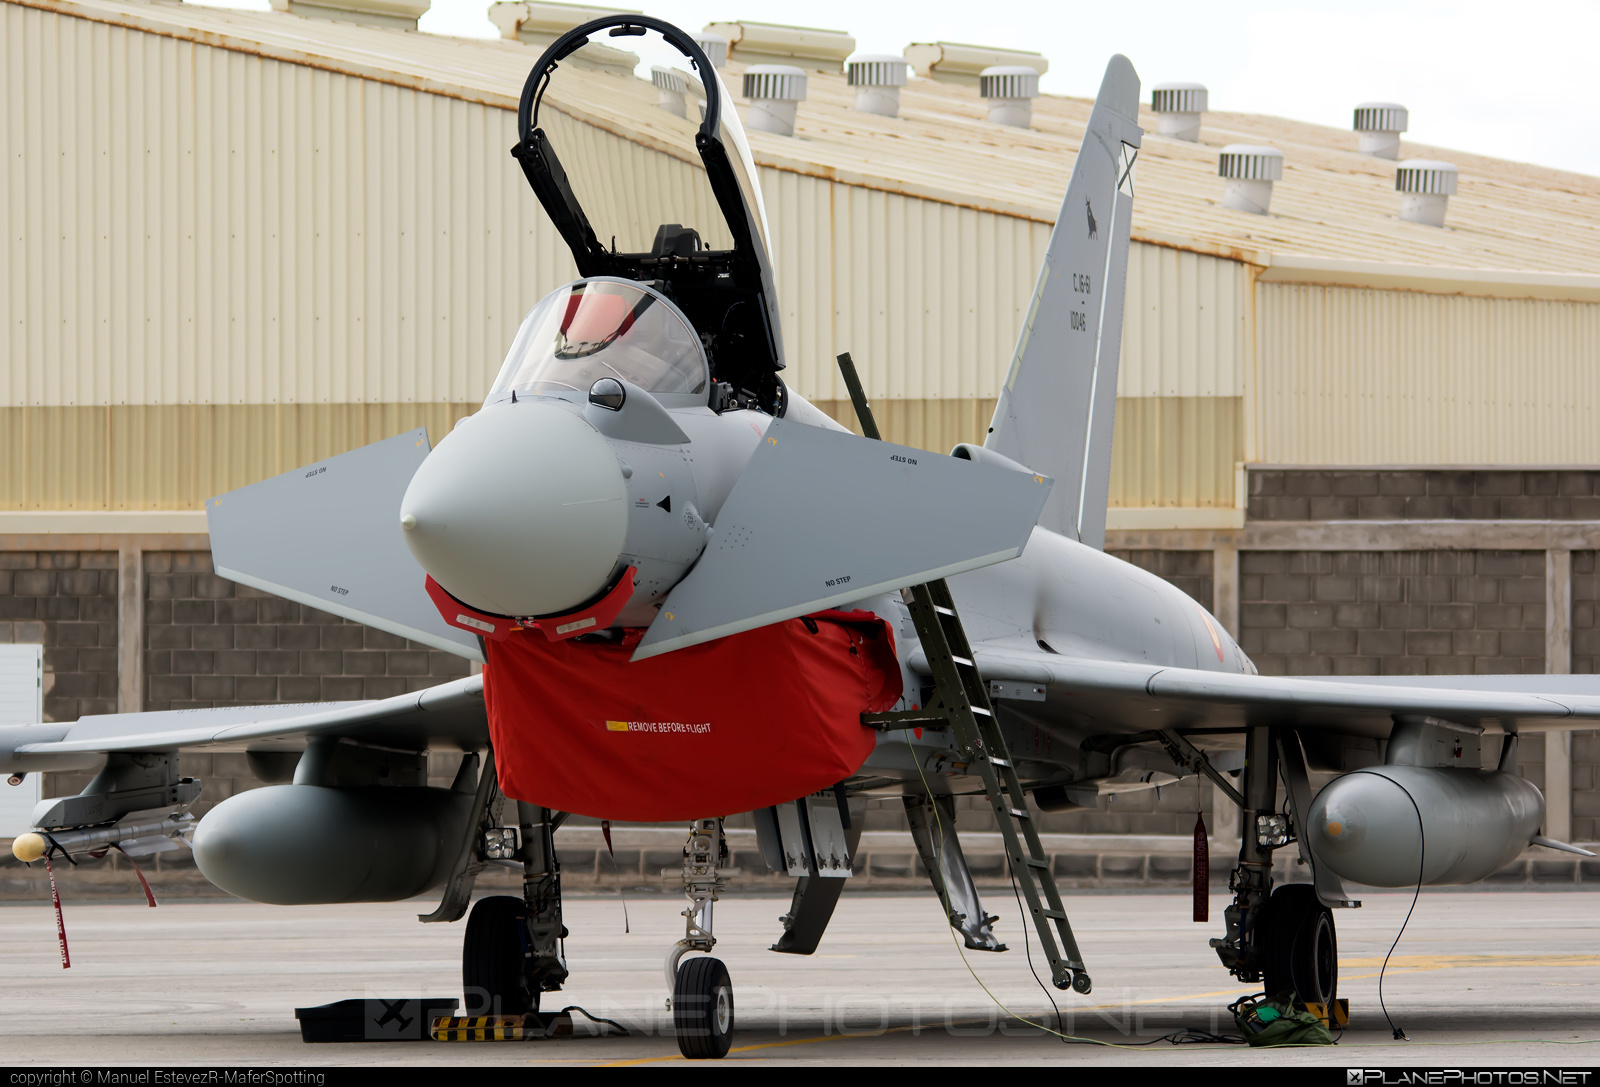 Eurofighter Typhoon S - C.16-61 operated by Ejército del Aire (Spanish Air Force) #ef2000 #ejercitoDelAire #eurofighter #eurofightertyphoon #spanishAirForce #typhoon #typhoons